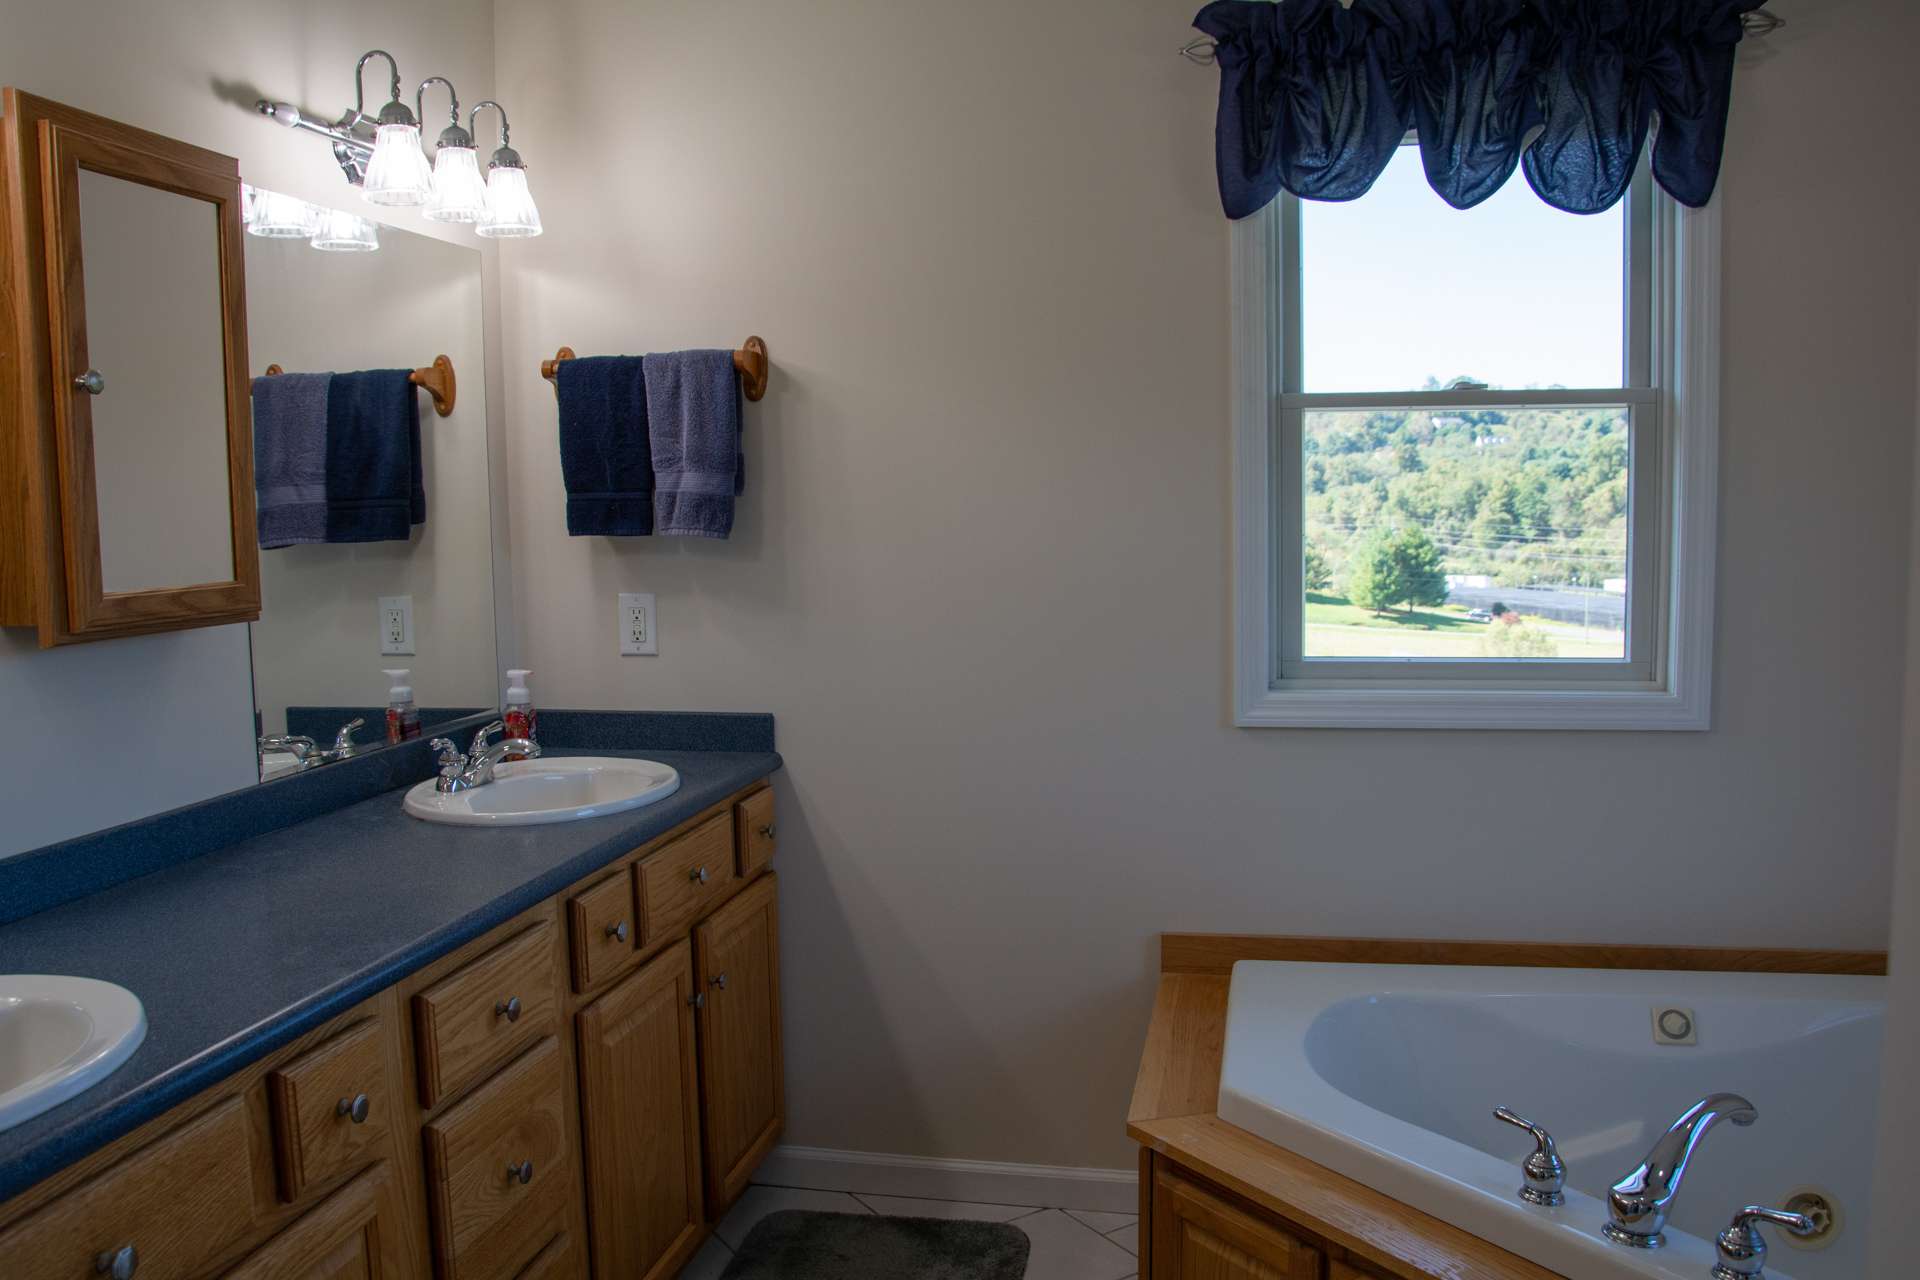 Master bath offers double vanity with lots of storage and counter space, a large whirlpool tub and separate shower.